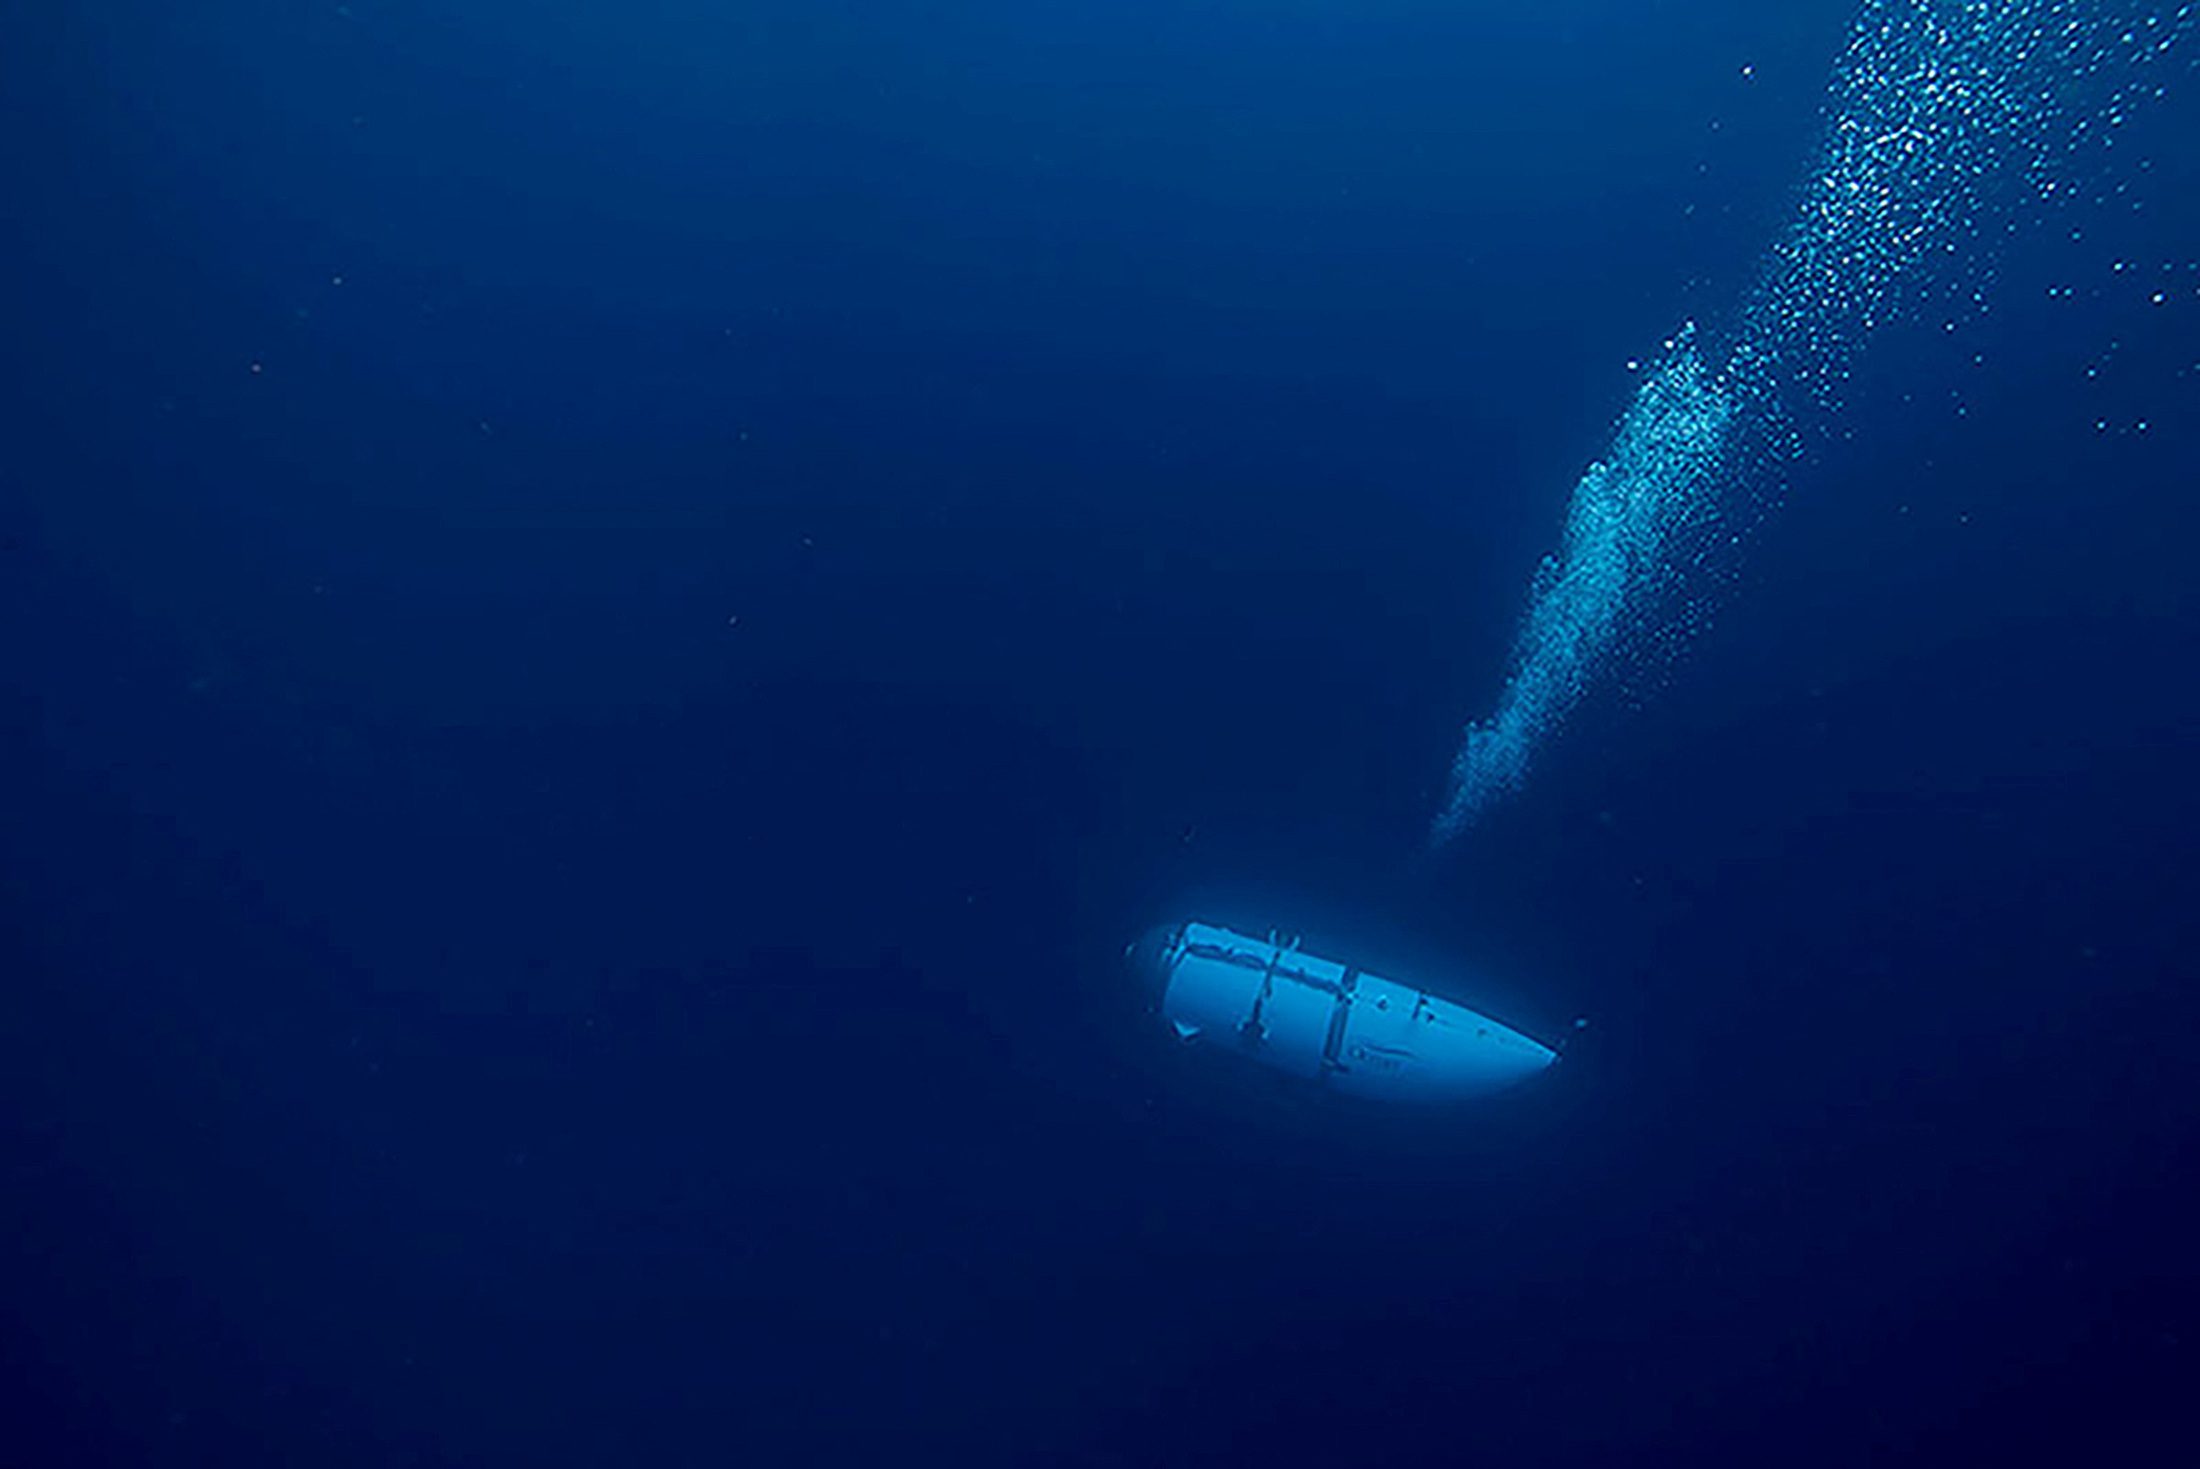 The Titan submersible, operated by OceanGate Expeditions to explore the wreckage of the sunken SS Titanic off the coast of Newfoundland, dives in an undated photograph. OceanGate Expeditions/Handout via REUTERS